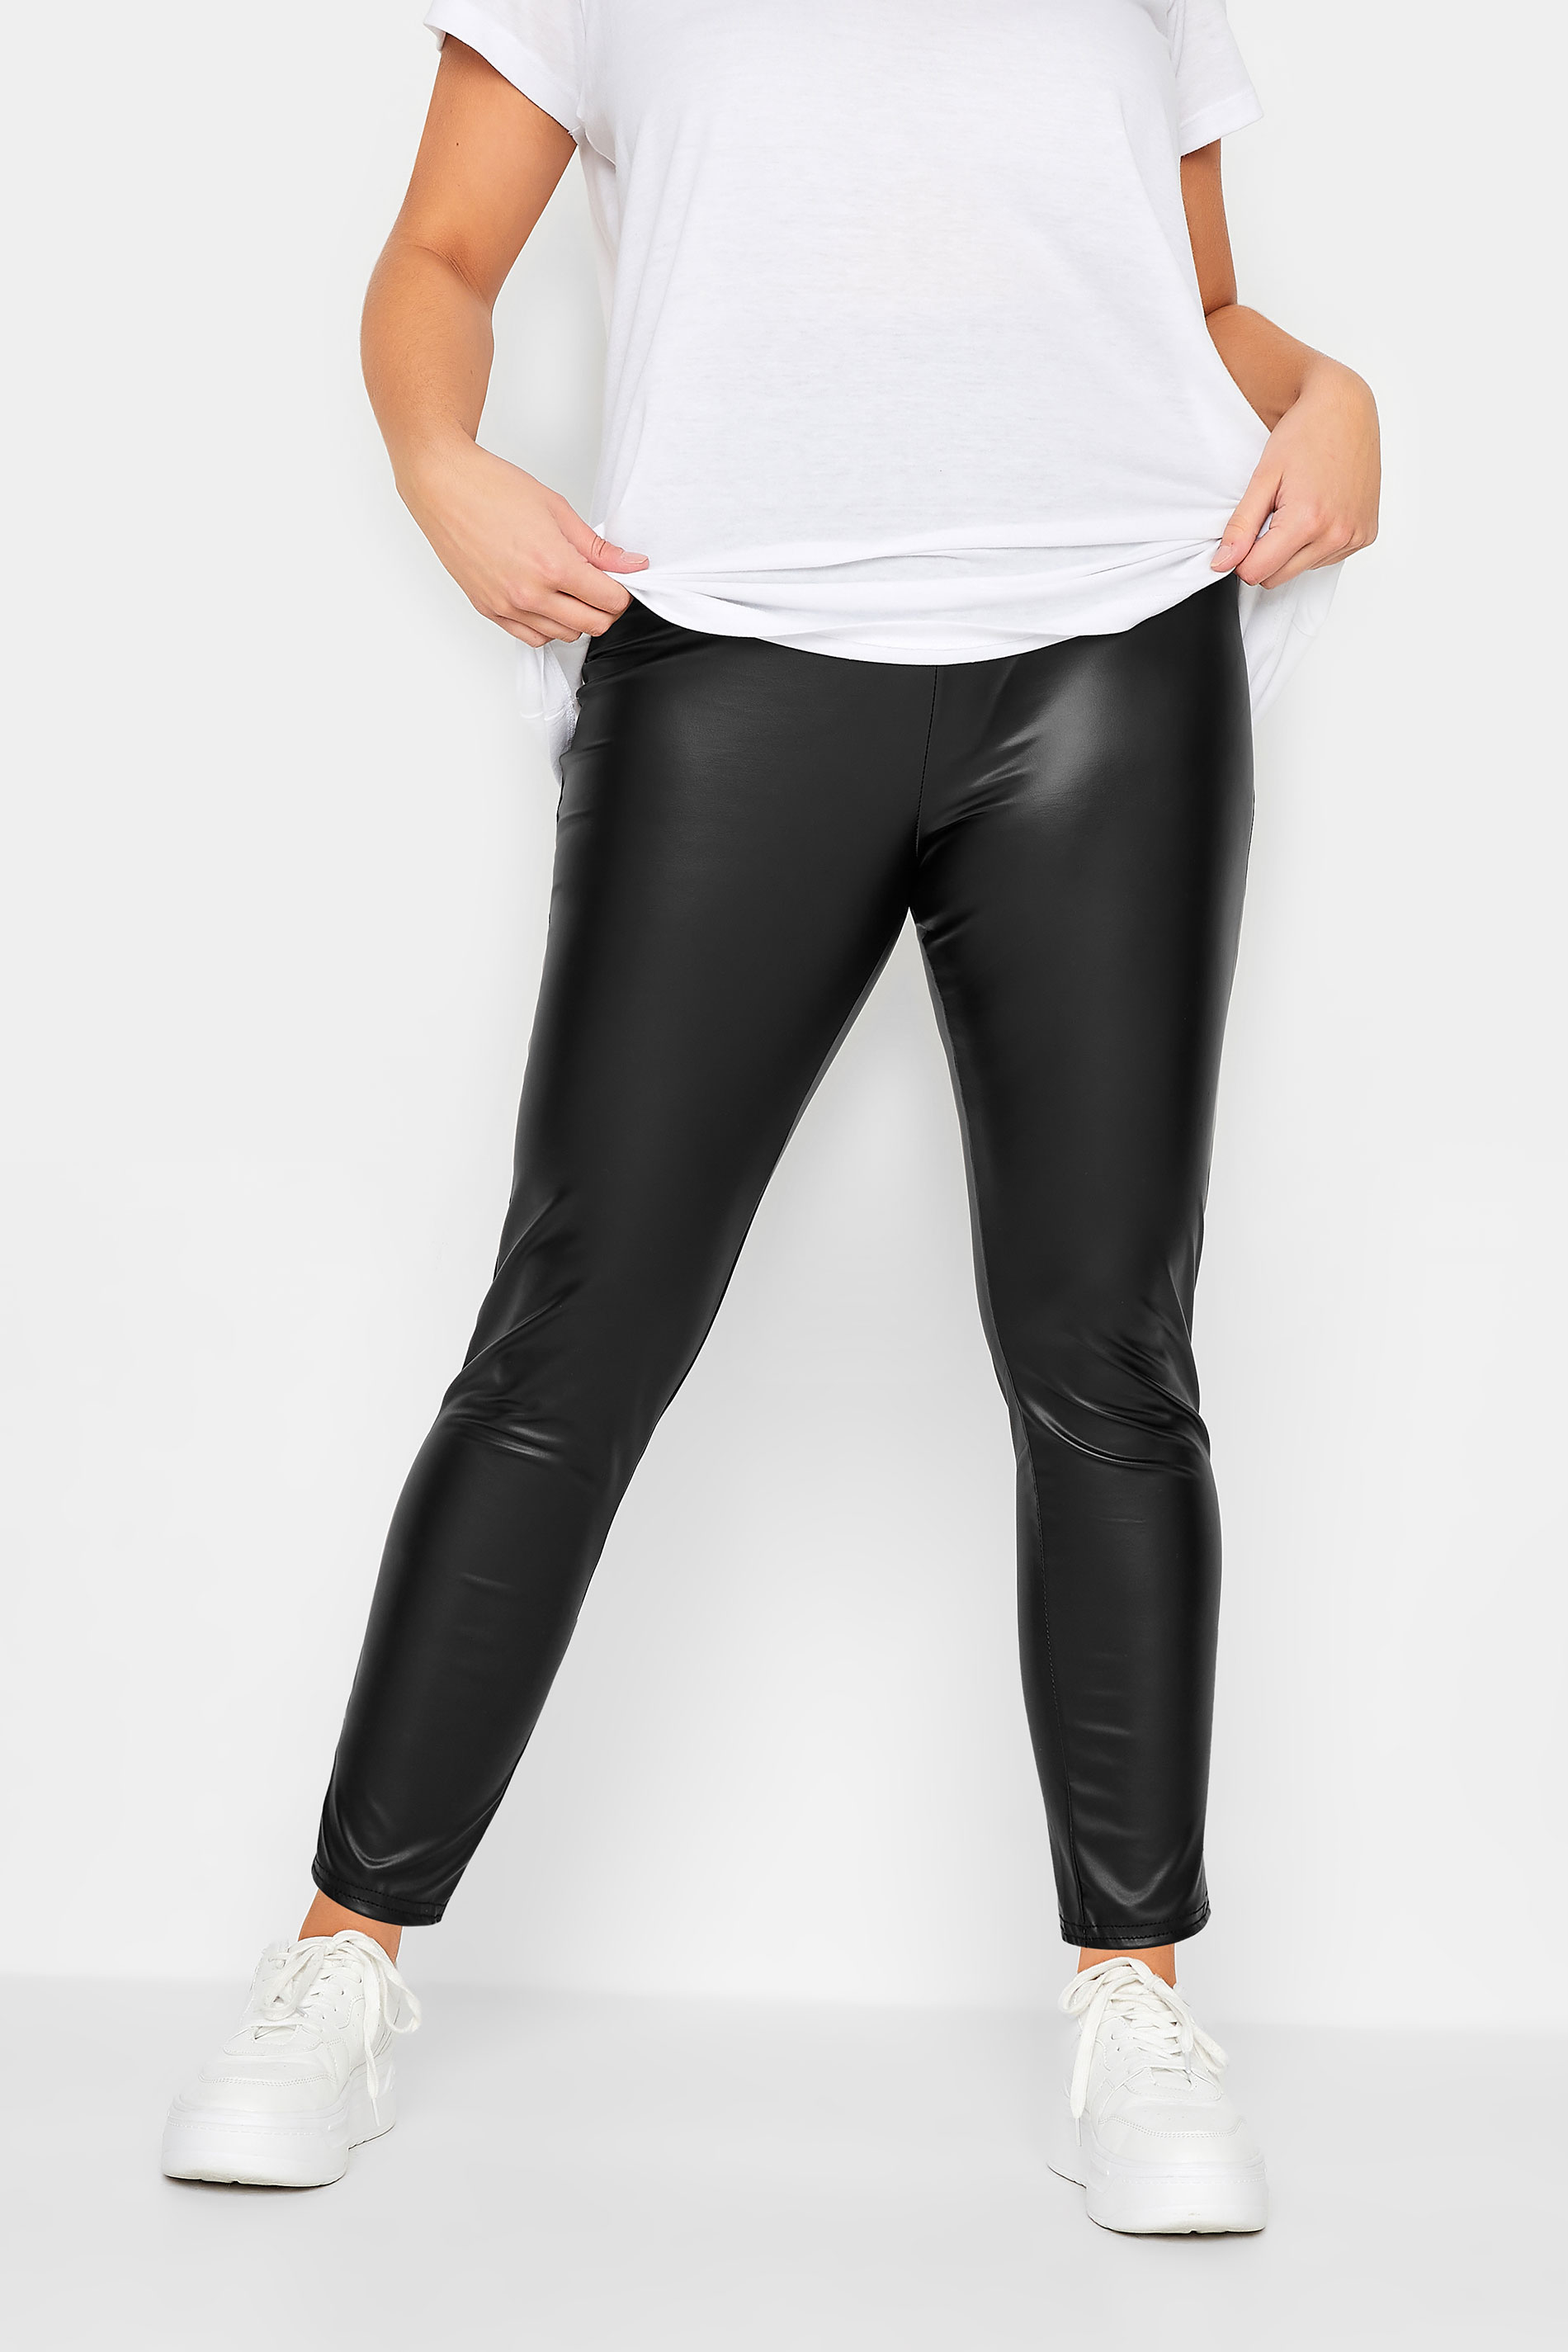 YOURS PETITE Plus Size Black Stretch Leather Look Leggings | Yours Clothing 1